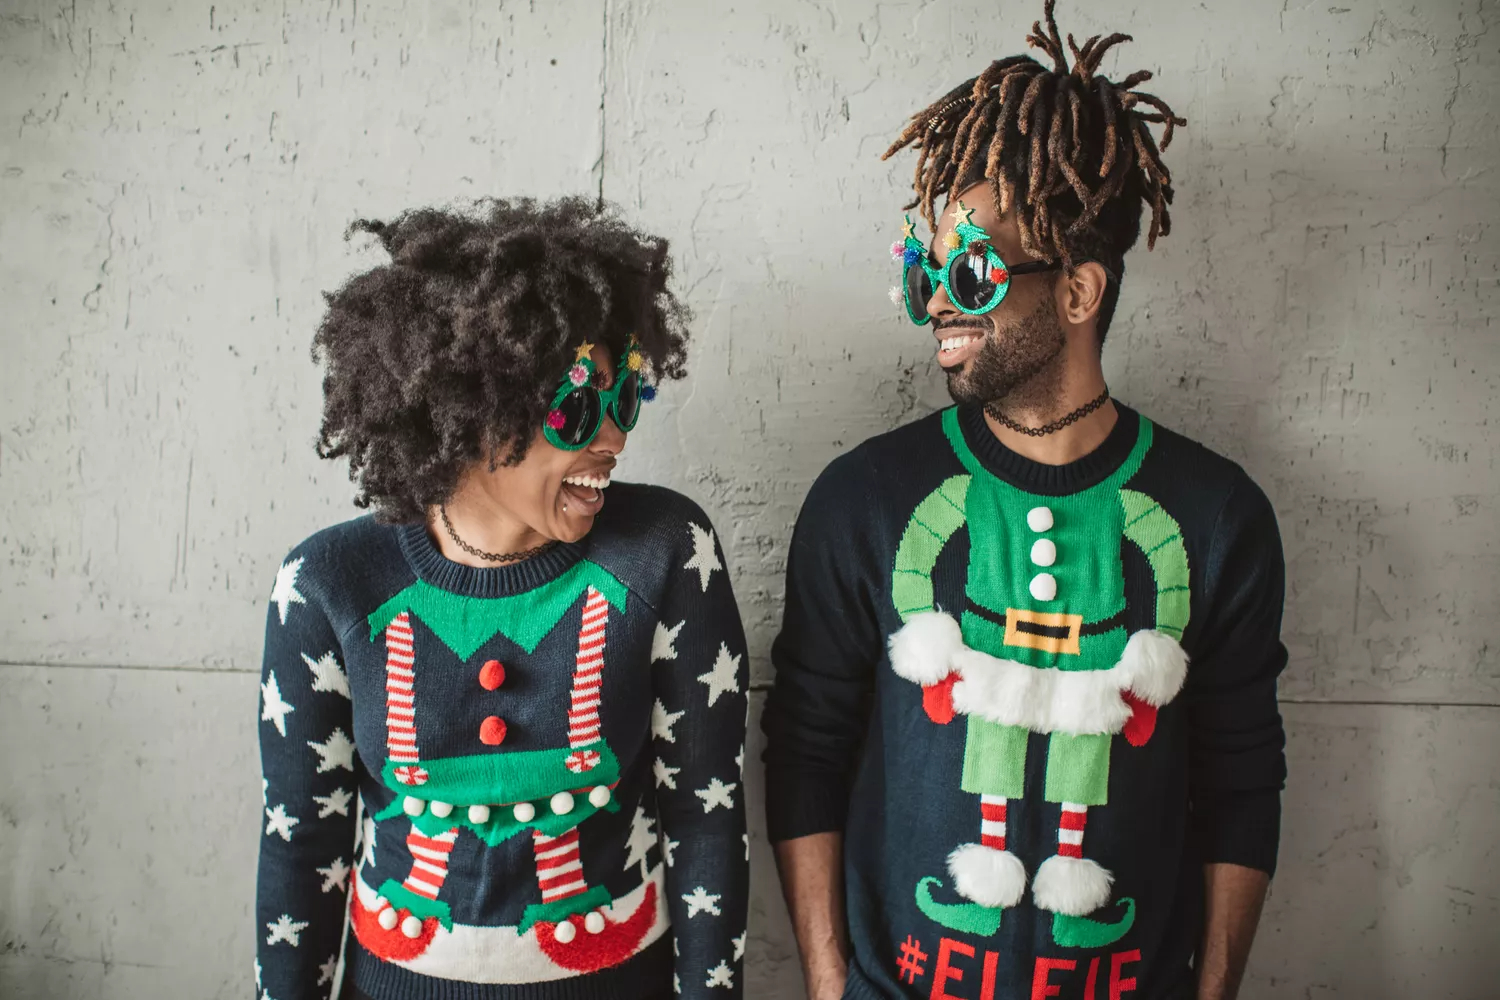 How The Ugly Christmas Sweater Got Its Name